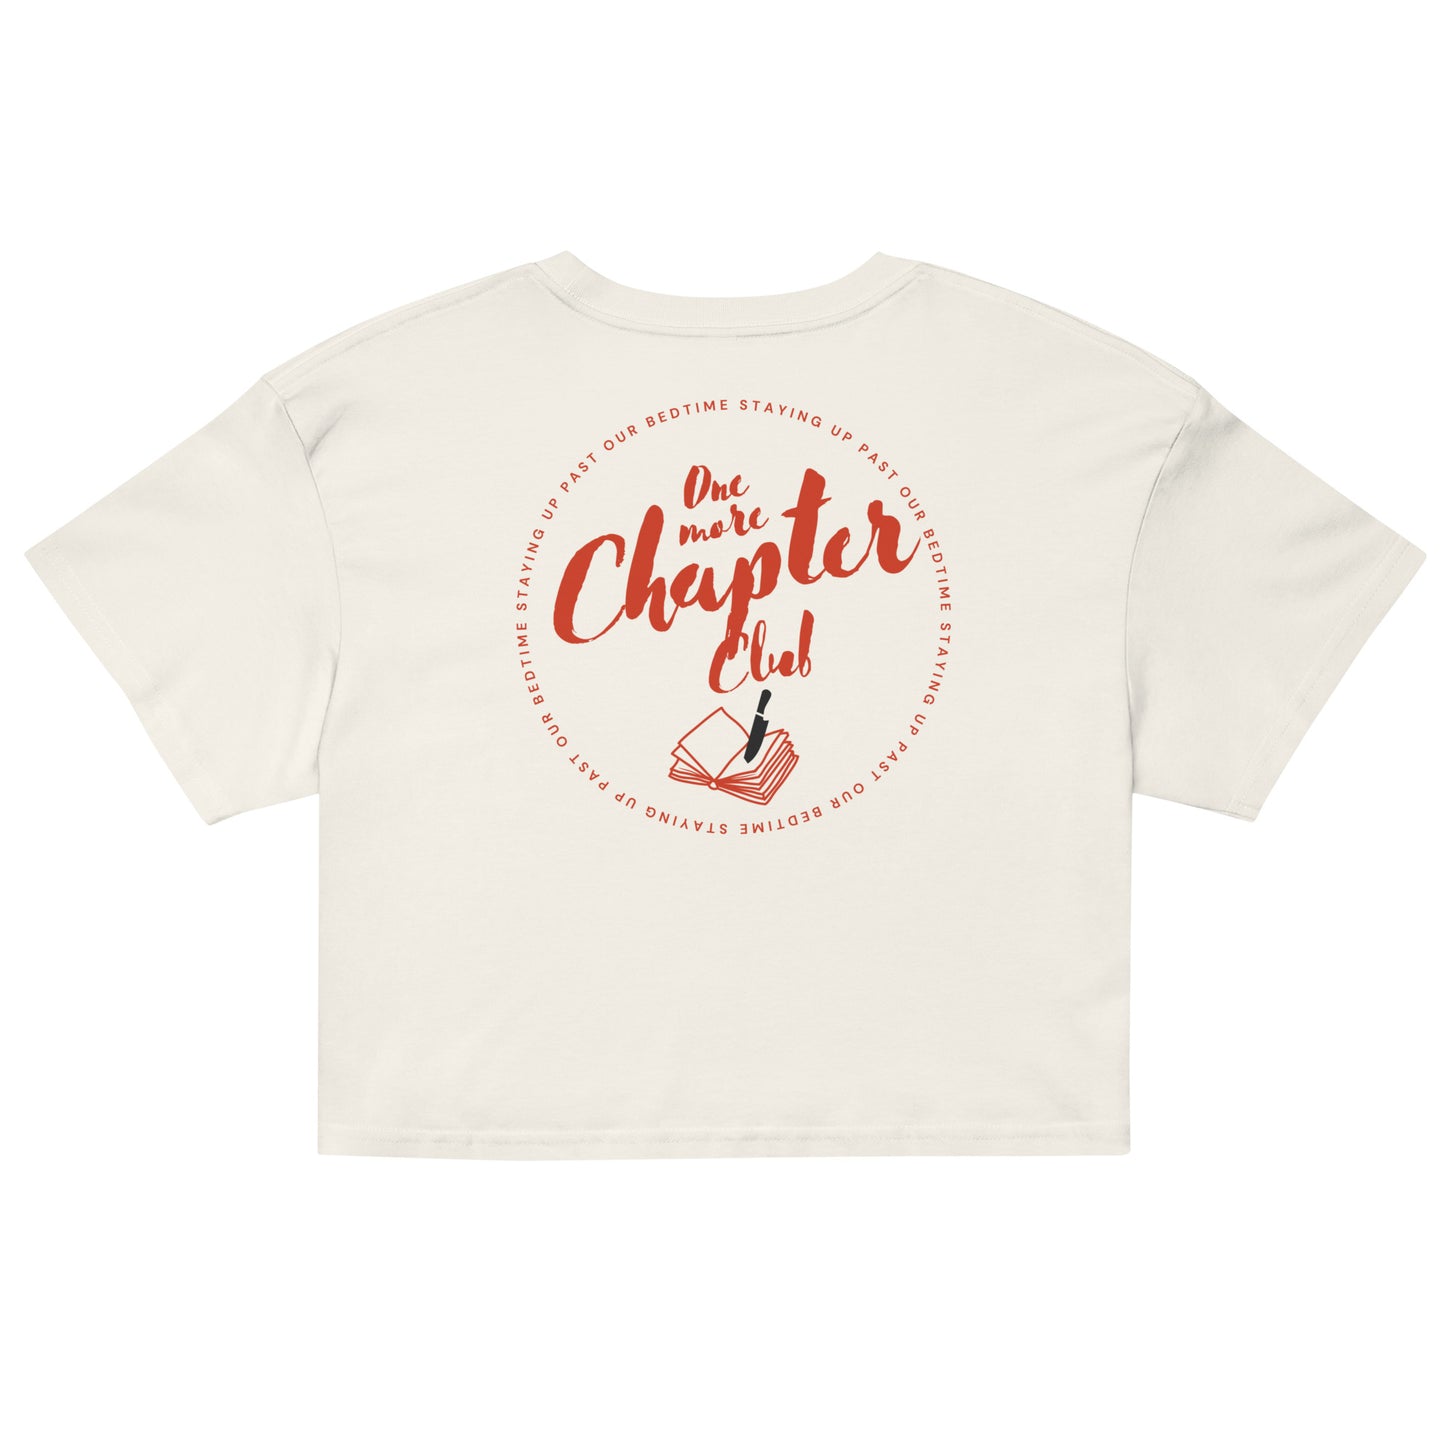 One More Chapter Club | Women’s crop top